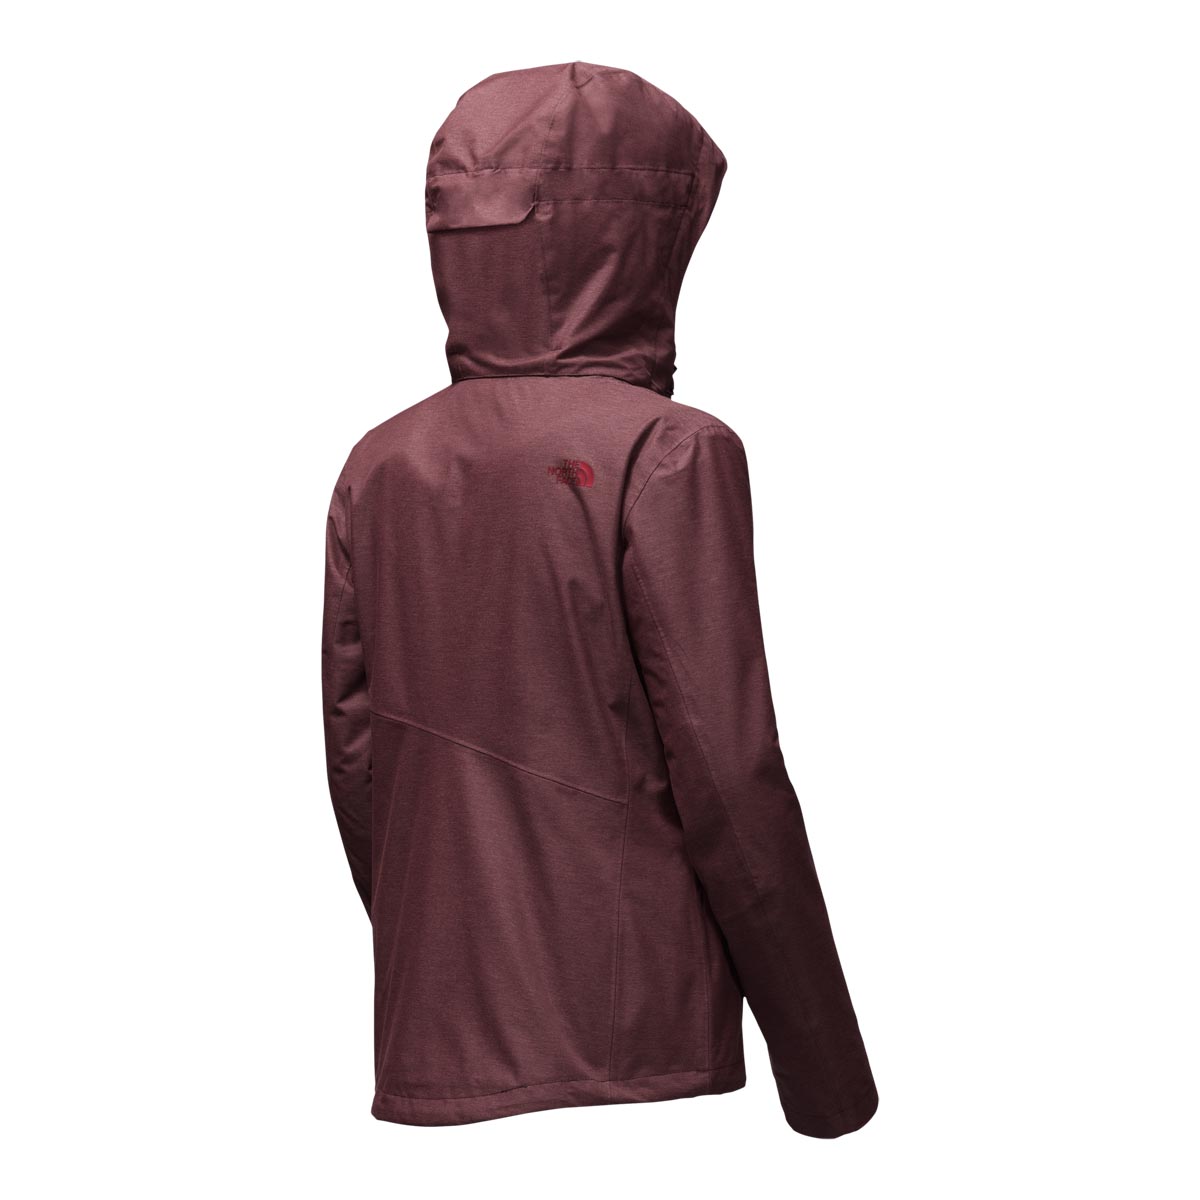 The North Face Women's Helata Triclimate Jacket